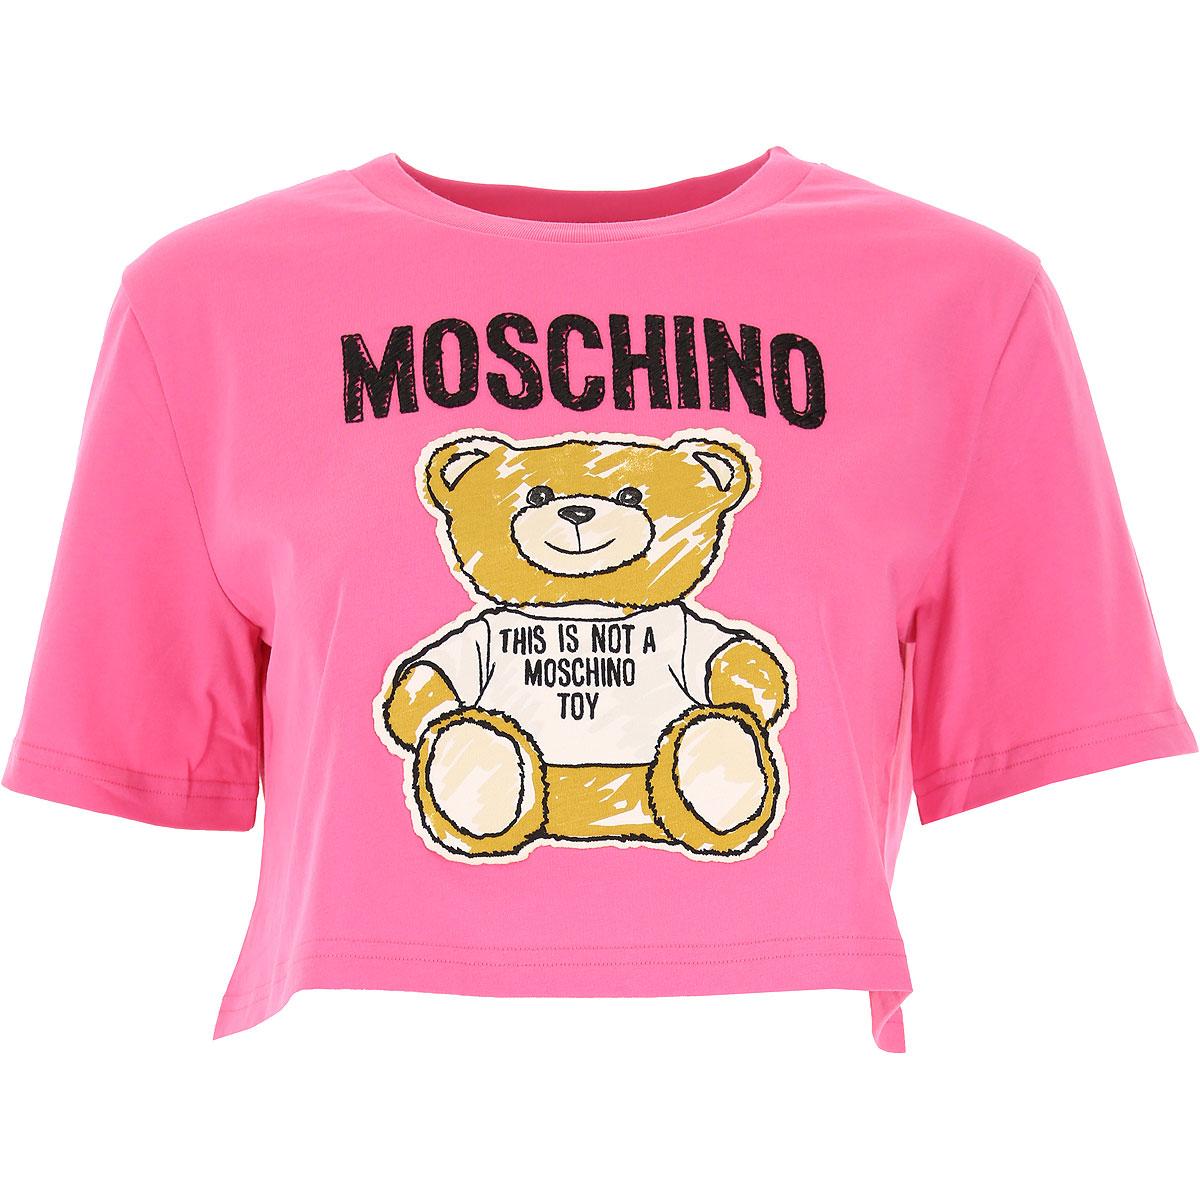 Moschino Cotton Clothing For Women in Fuchsia (Pink) - Lyst